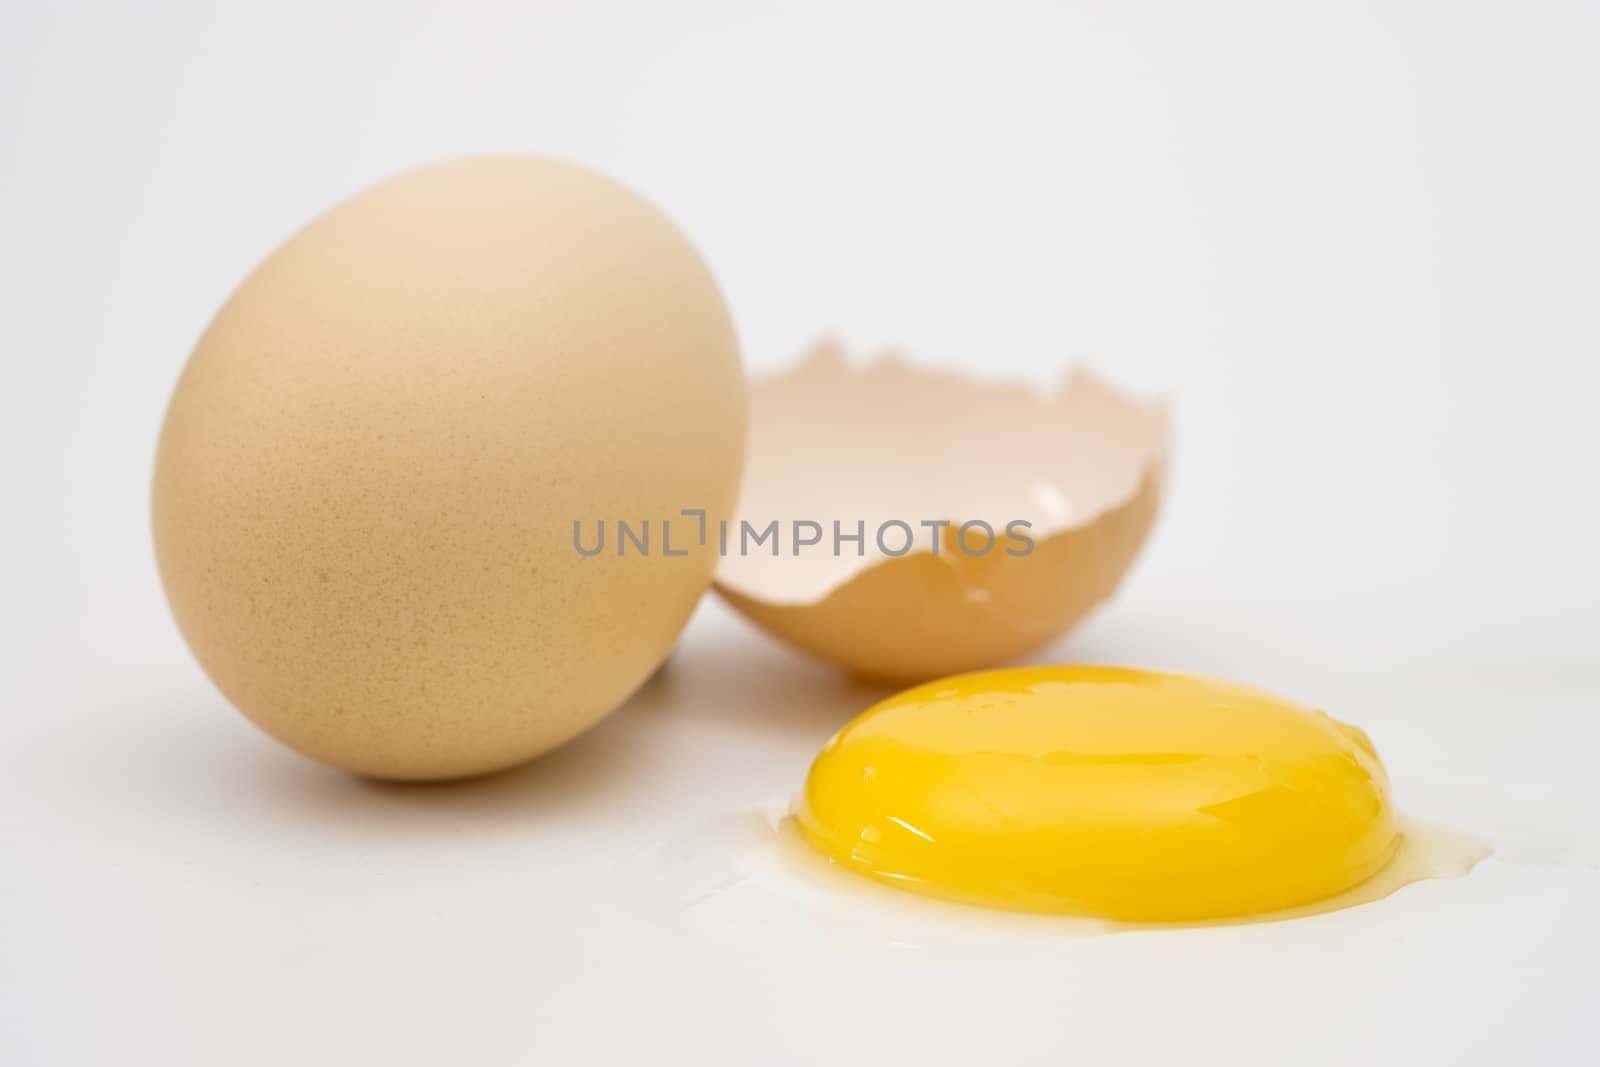 Eggs and yolks arranged in a white scene, Egg is beneficial to the body, Food concept.